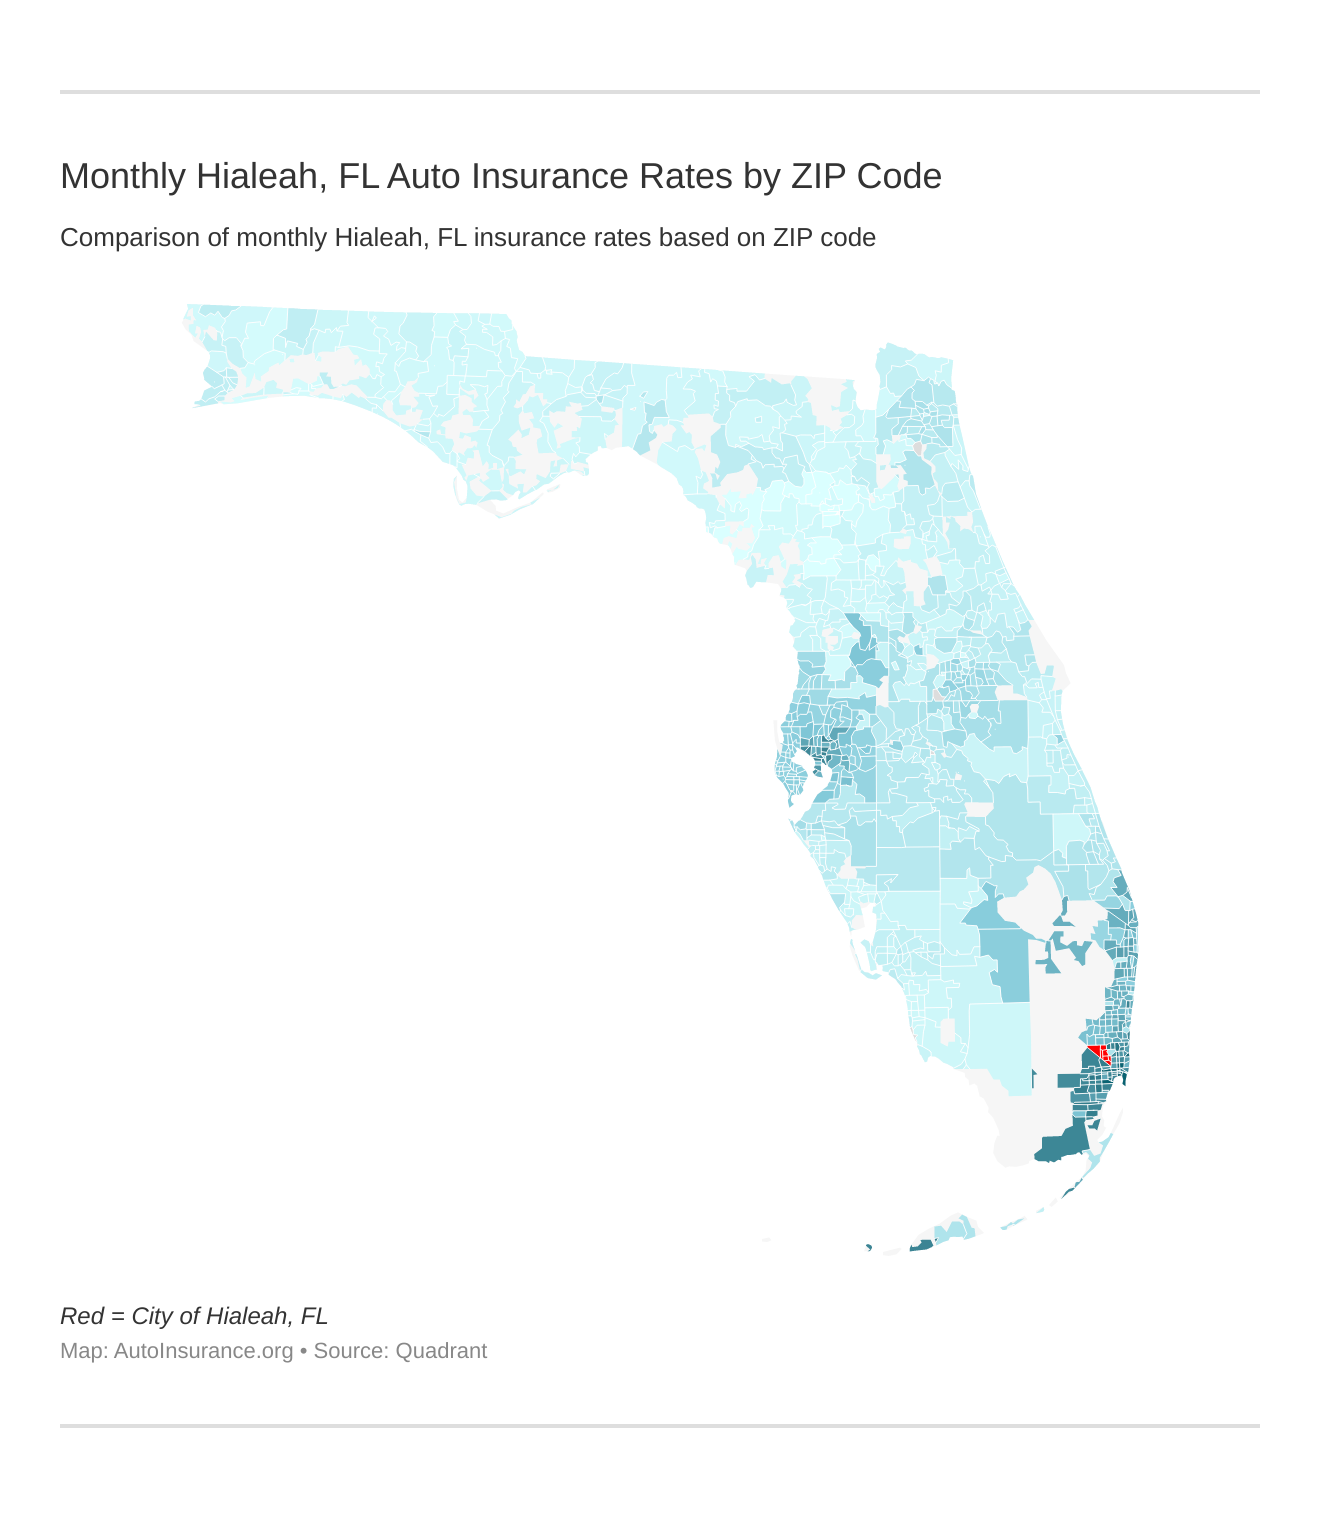 Monthly Hialeah, FL Auto Insurance Rates by ZIP Code